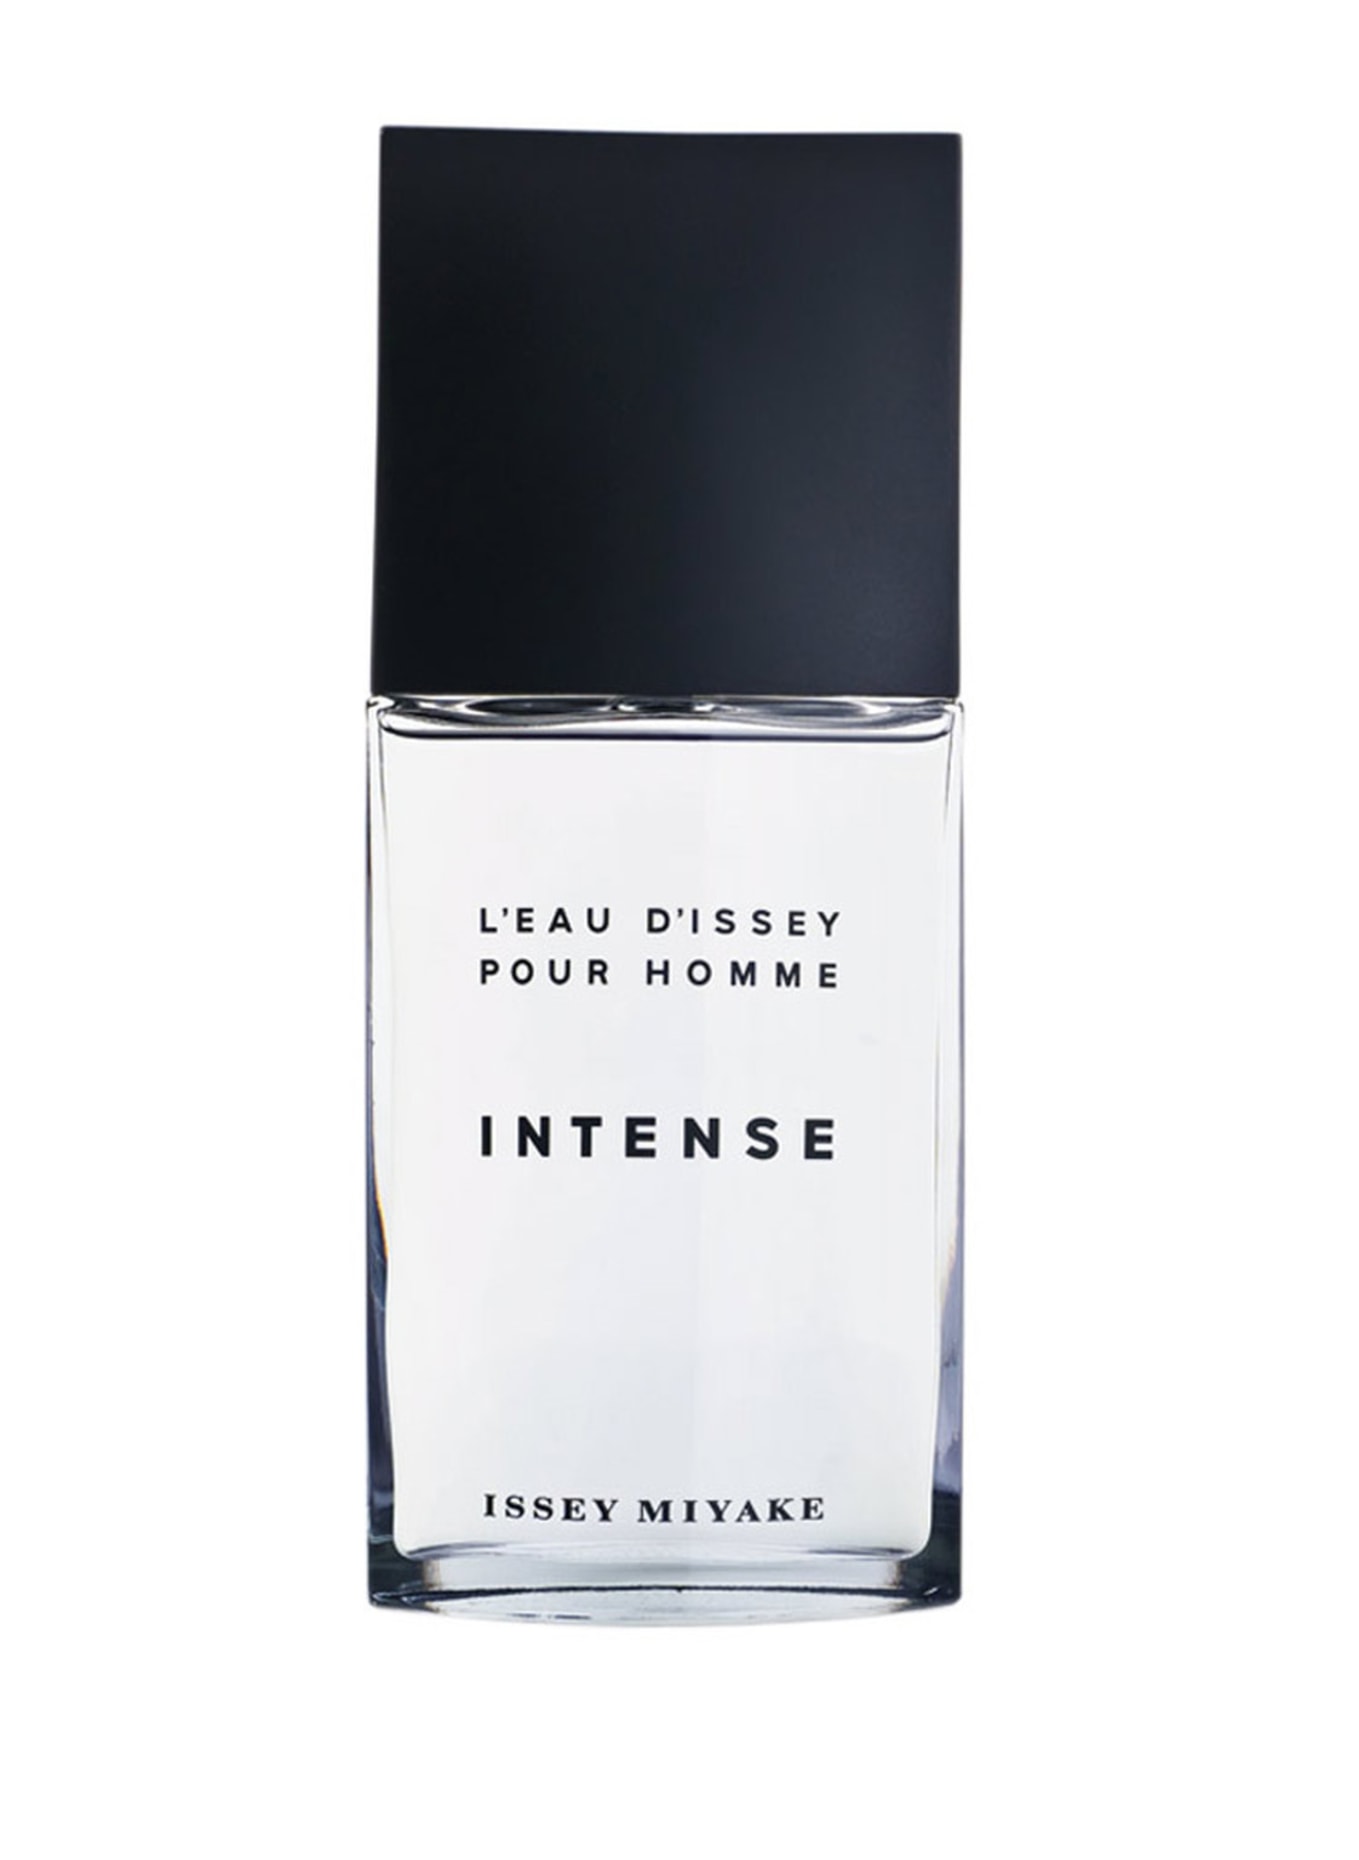 ISSEY MIYAKE L'EAU D'ISSEY POUR HOMME INTENSE (Obrazek 1)